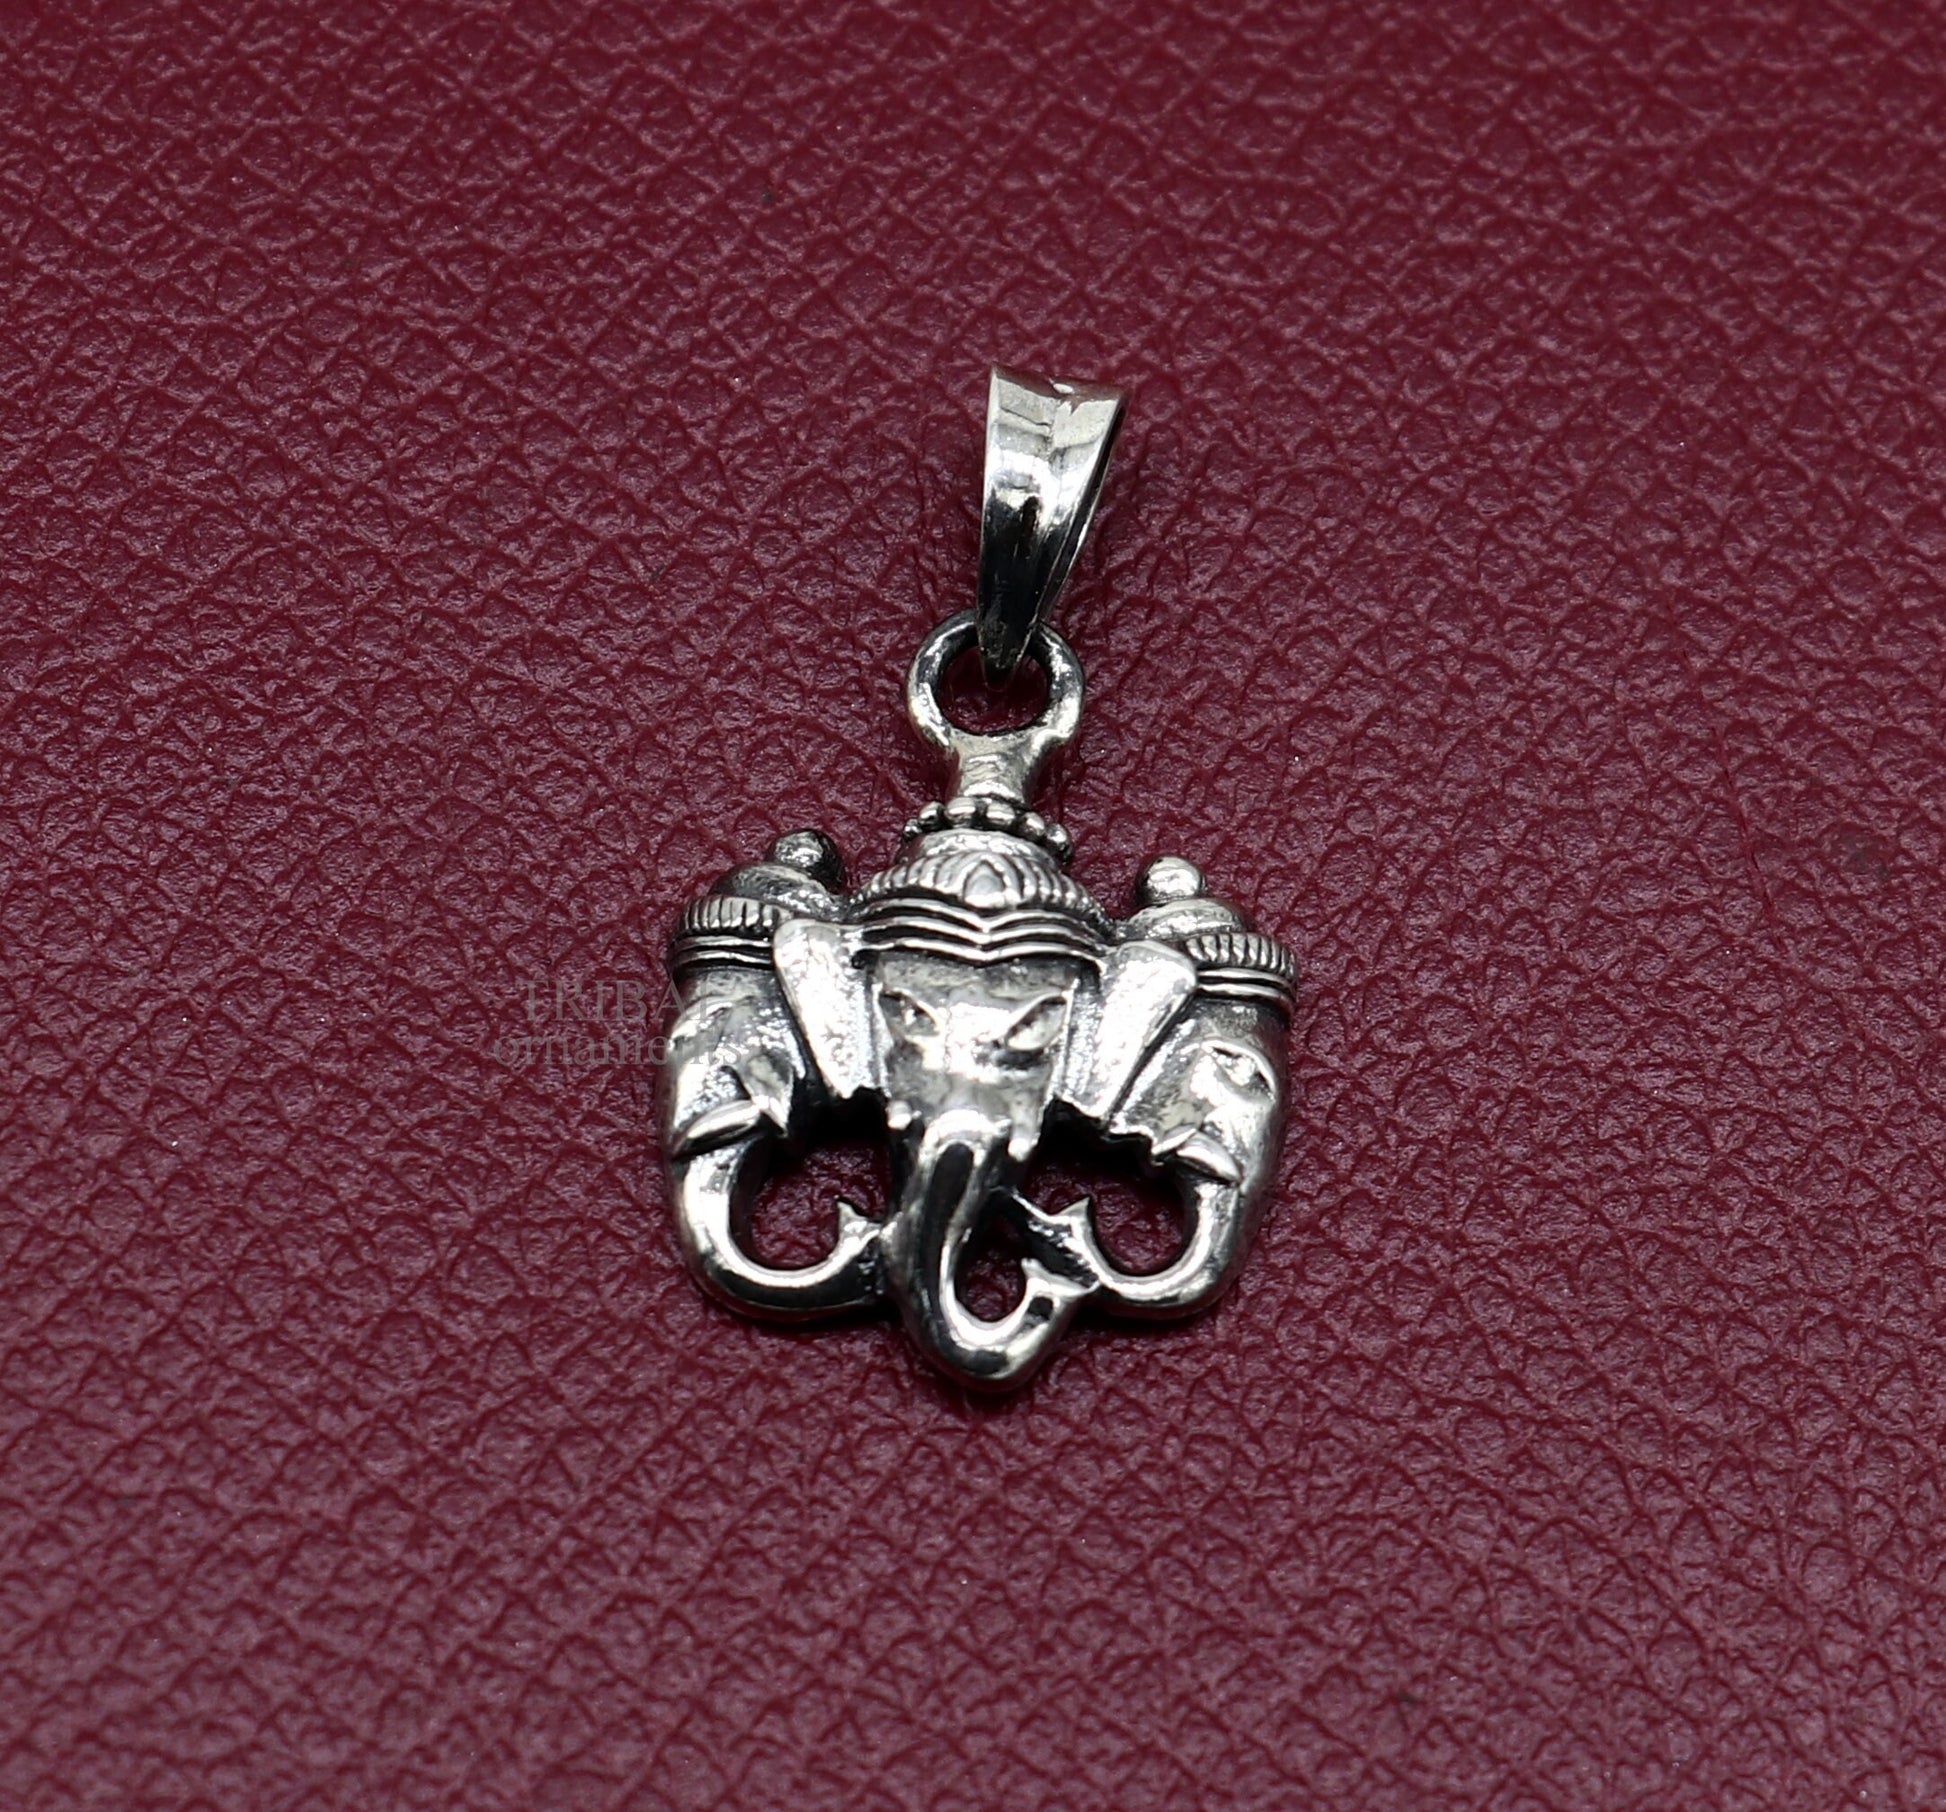 Exclusive design 925 sterling silver handmade 3 face Ganesha divine pendant, amazing stylish unisex pendant personalized jewelry ssp1644 - TRIBAL ORNAMENTS